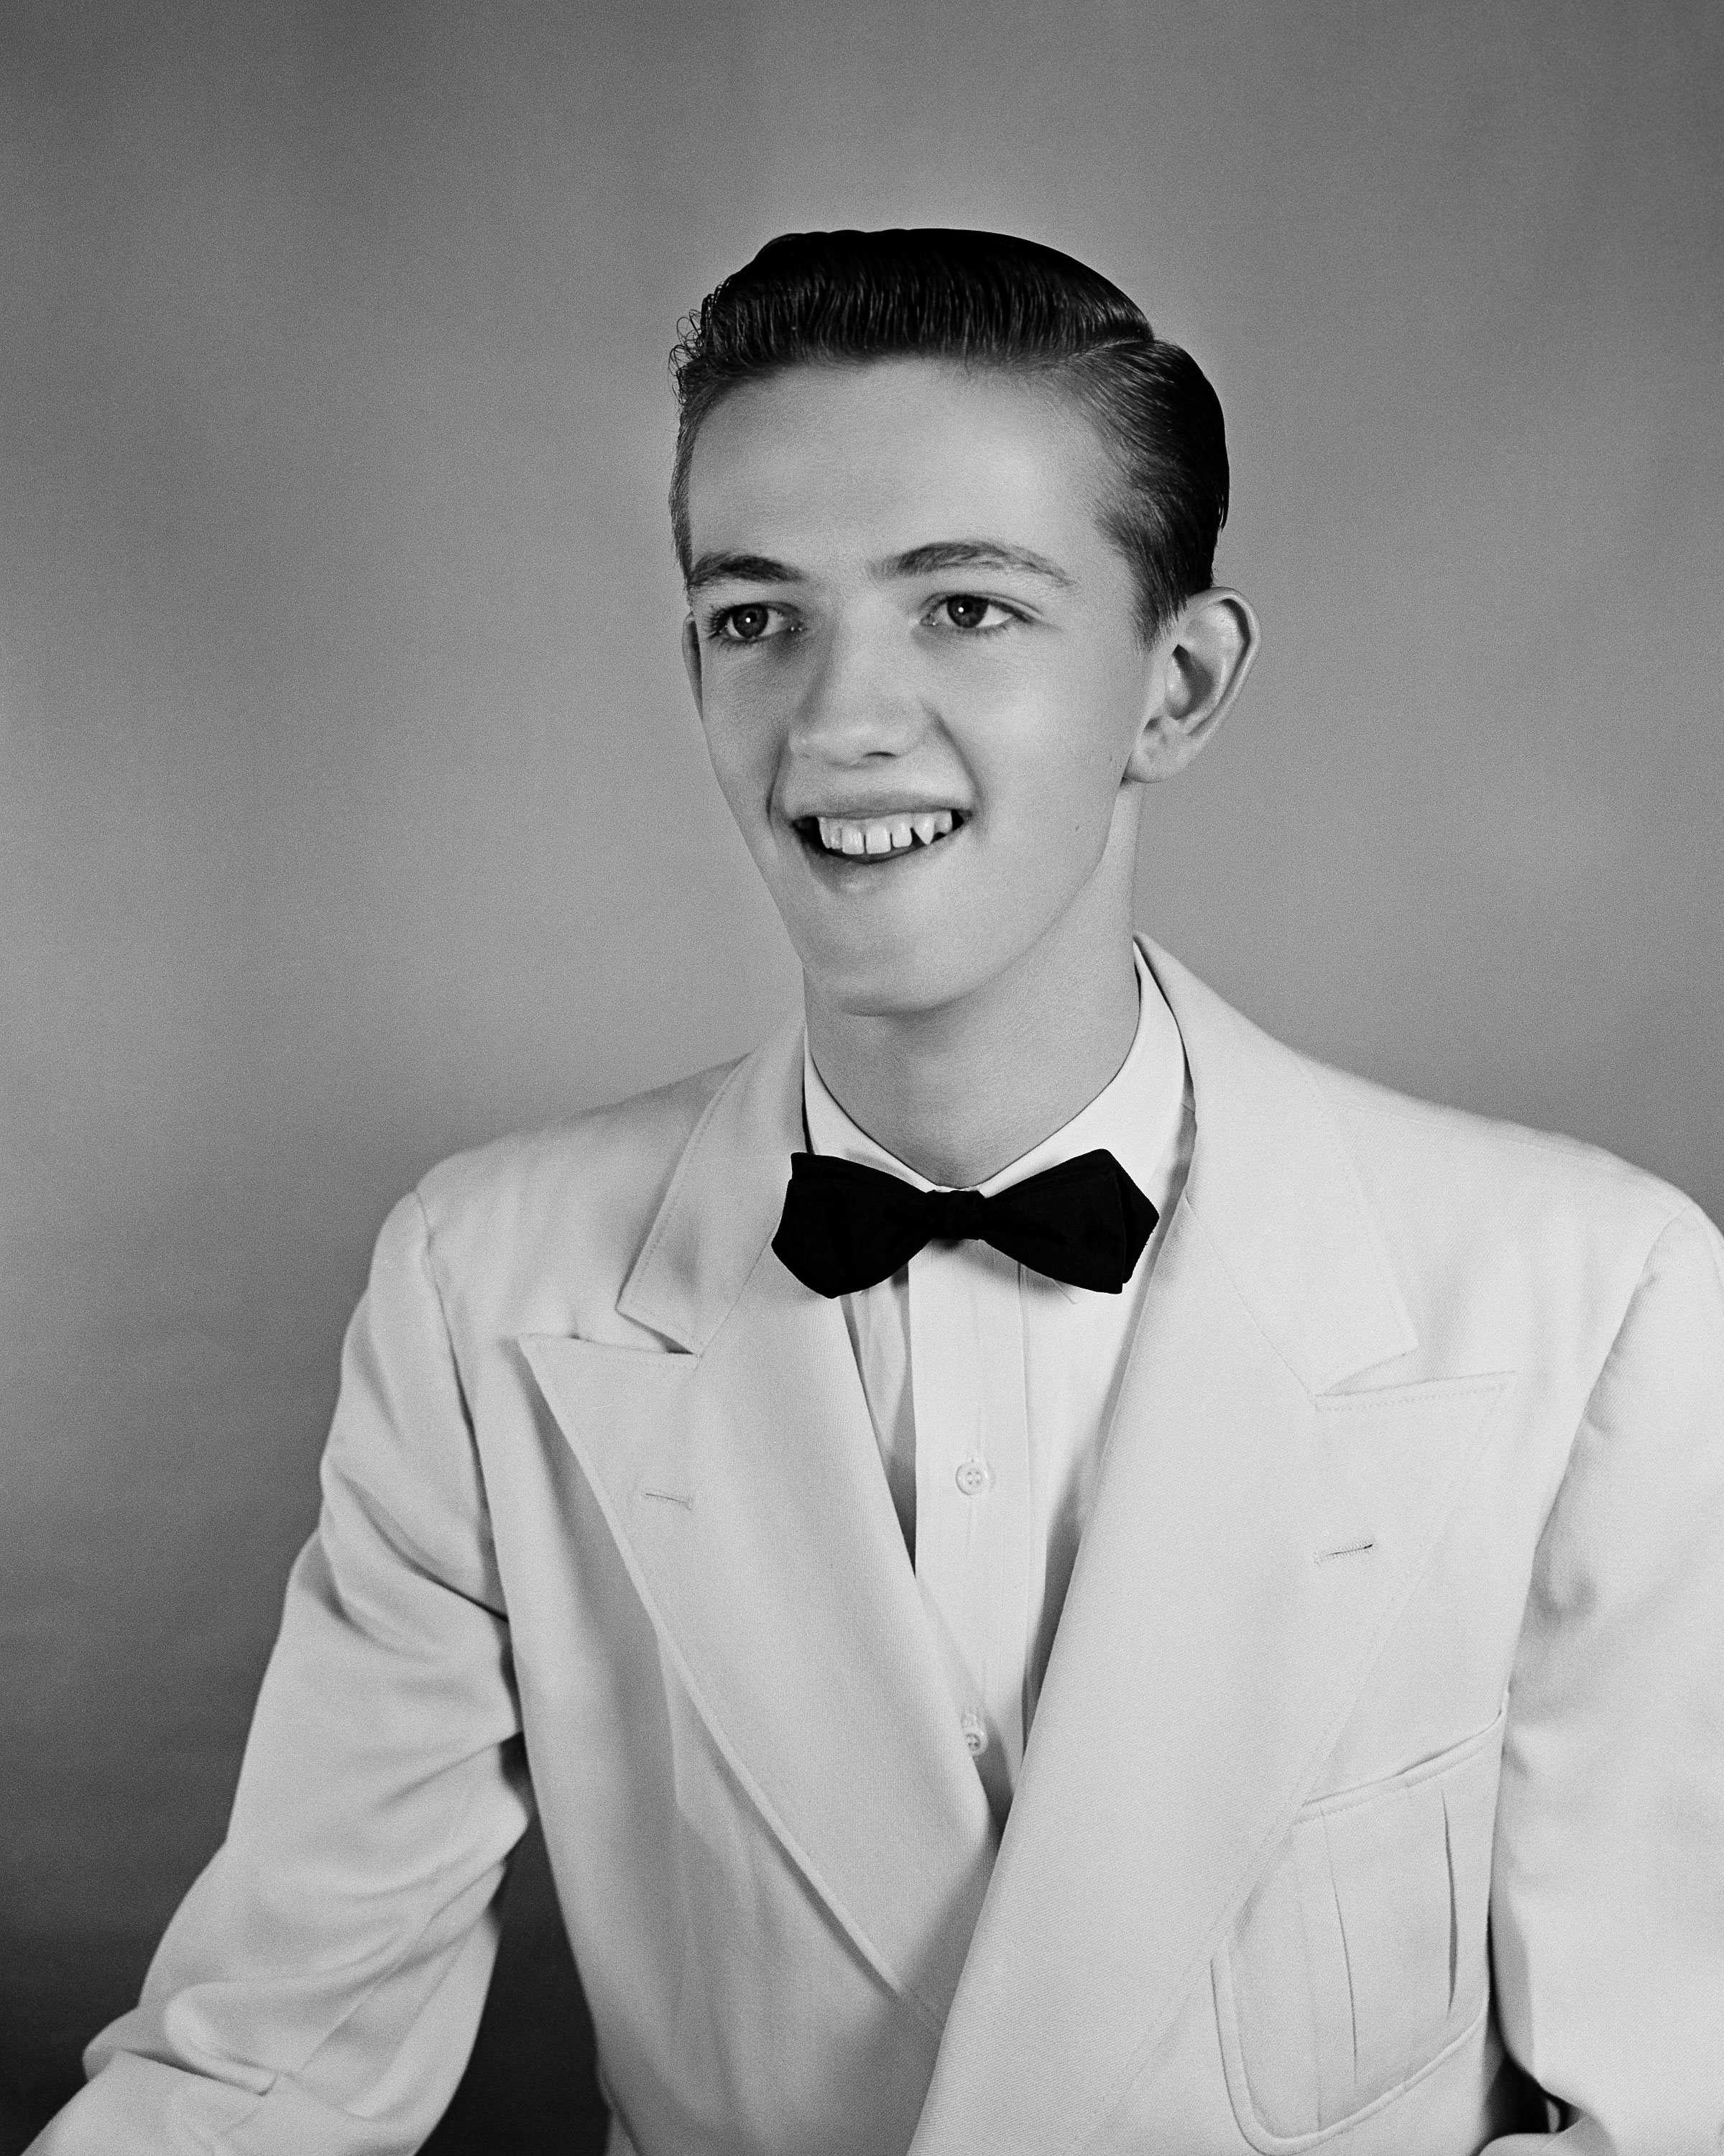 Gustafson as a BJU student in 1949